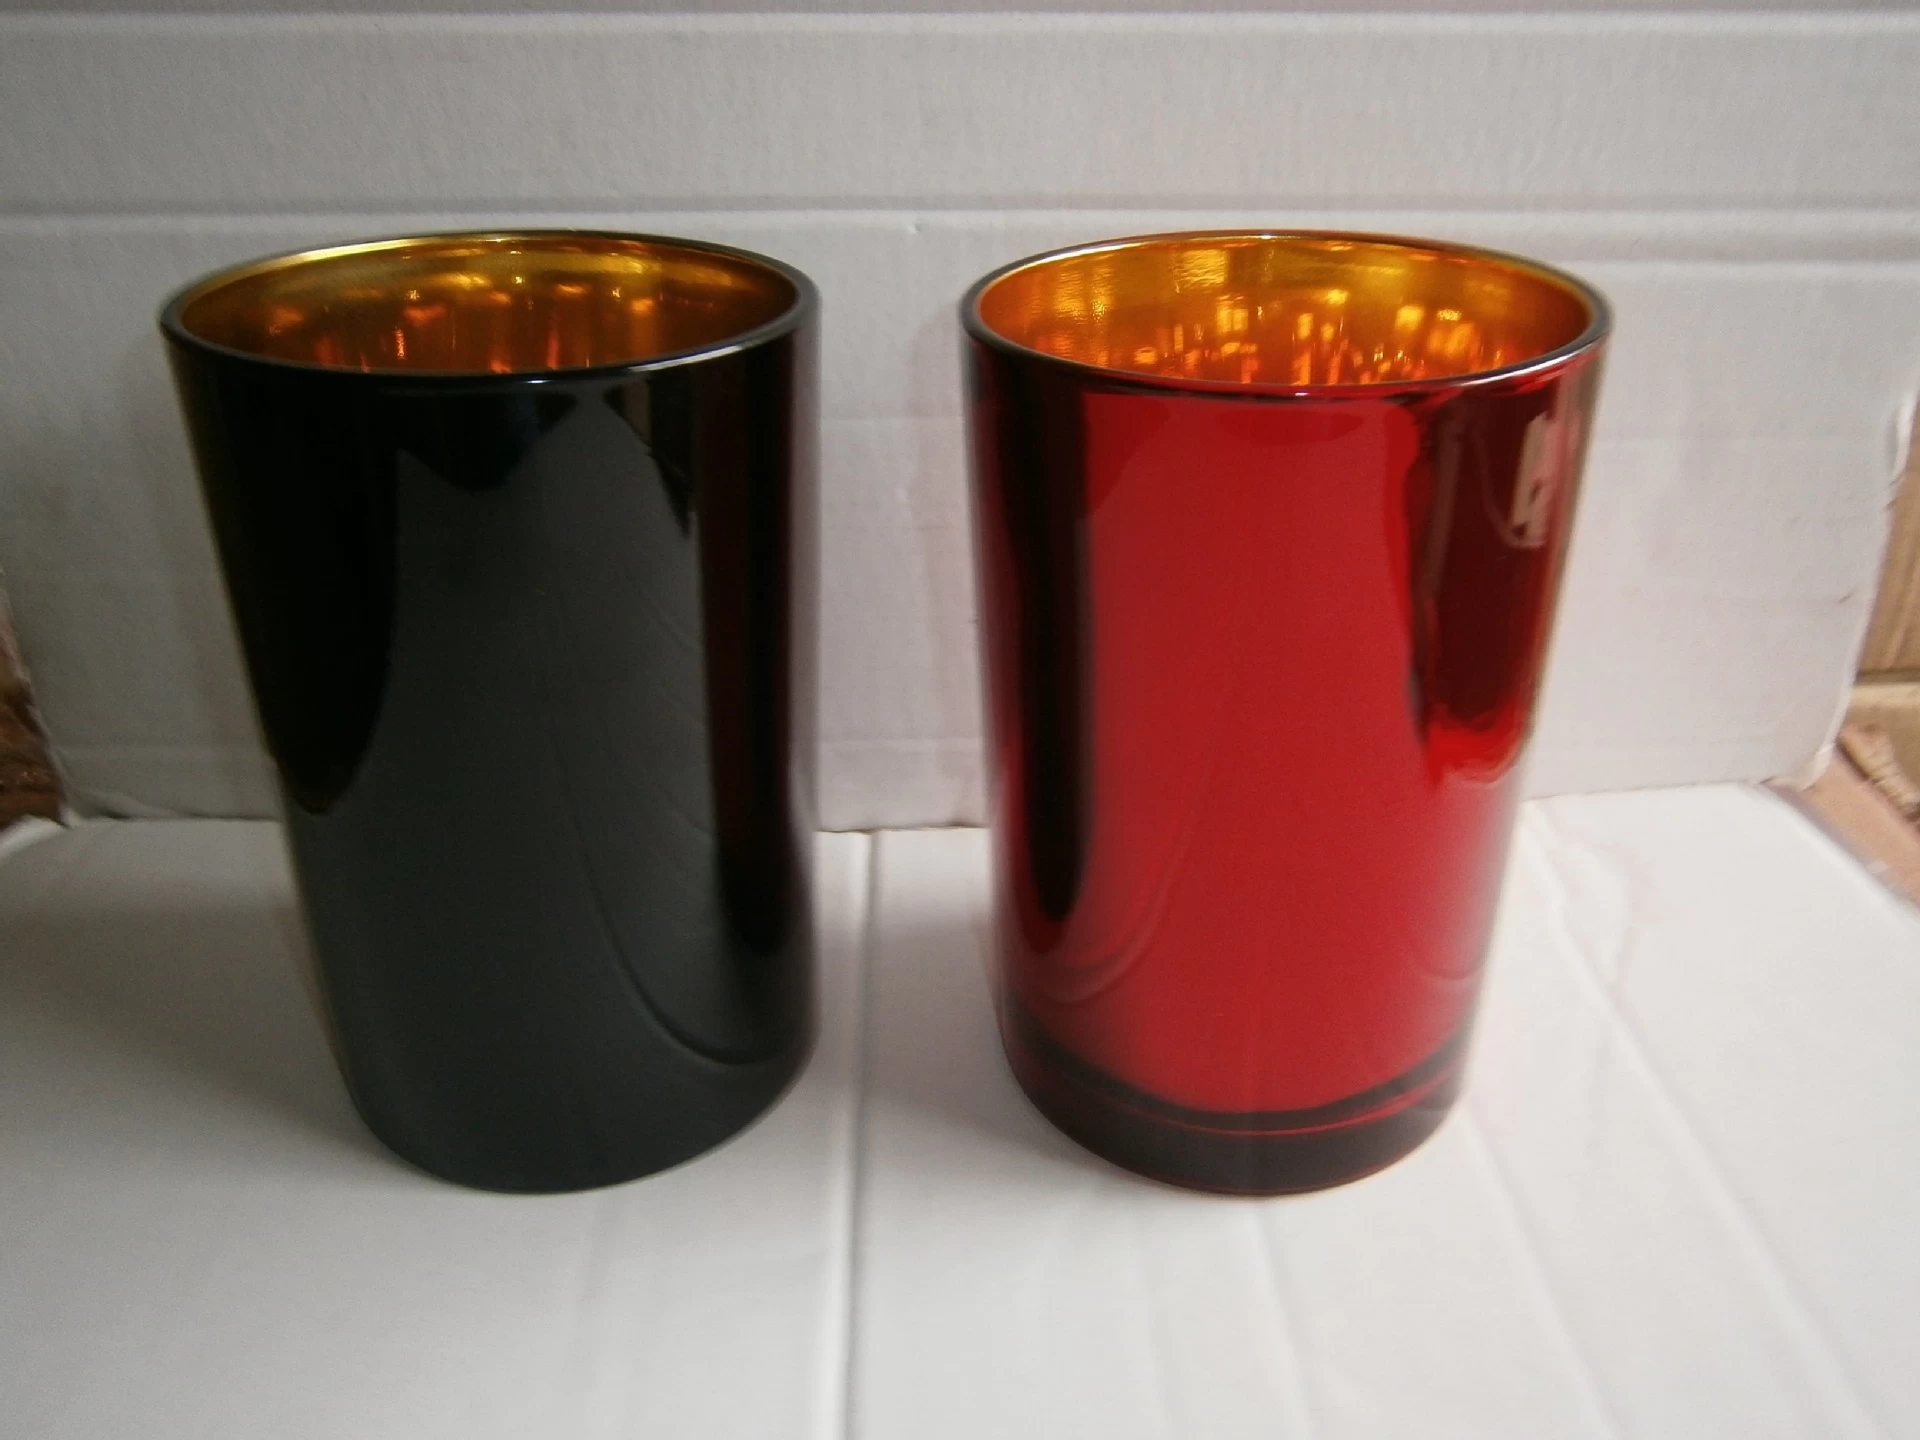 Large votive glass candle jar with gold and black color